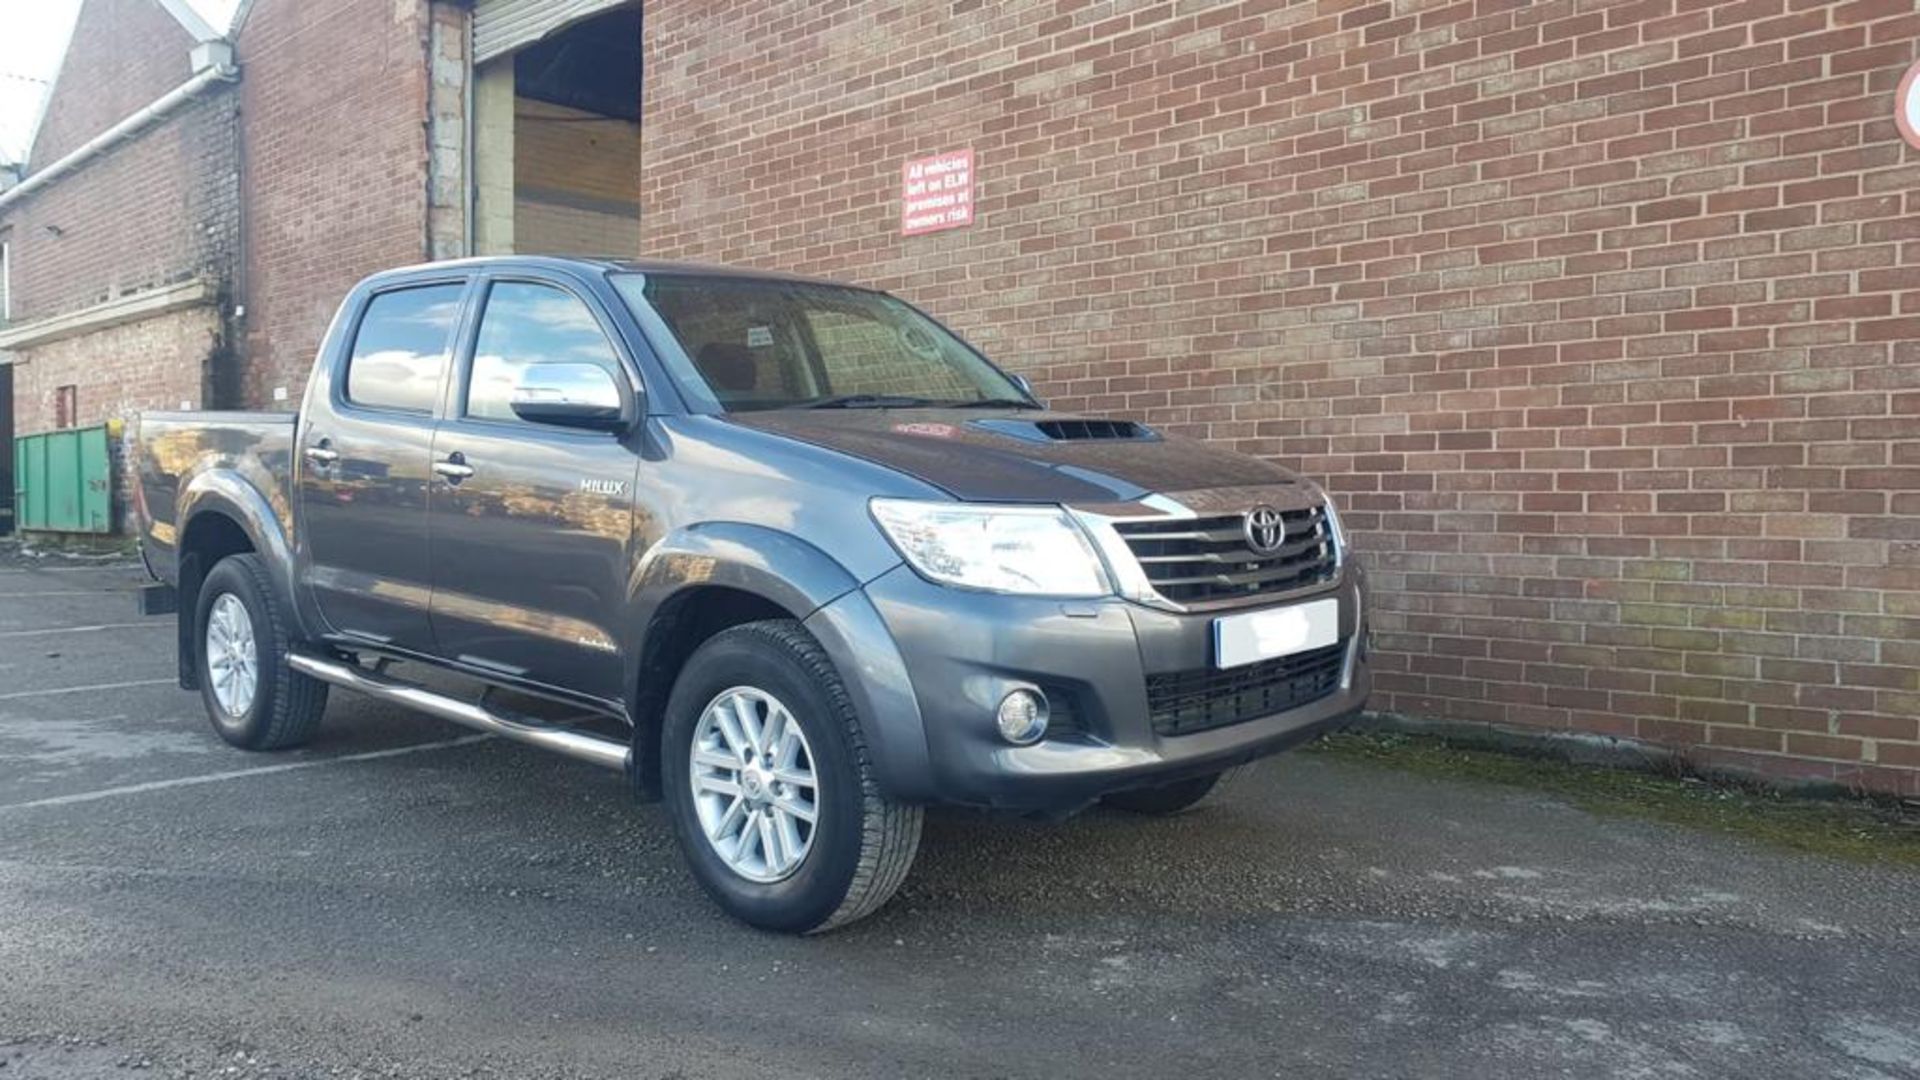 2015/64 REG TOYOTA HILUX INVINCIBLE D-4D 4X4 GREY DIESEL LIGHT UTILITY, SHOWING 1 FORMER KEEPER - Image 2 of 22